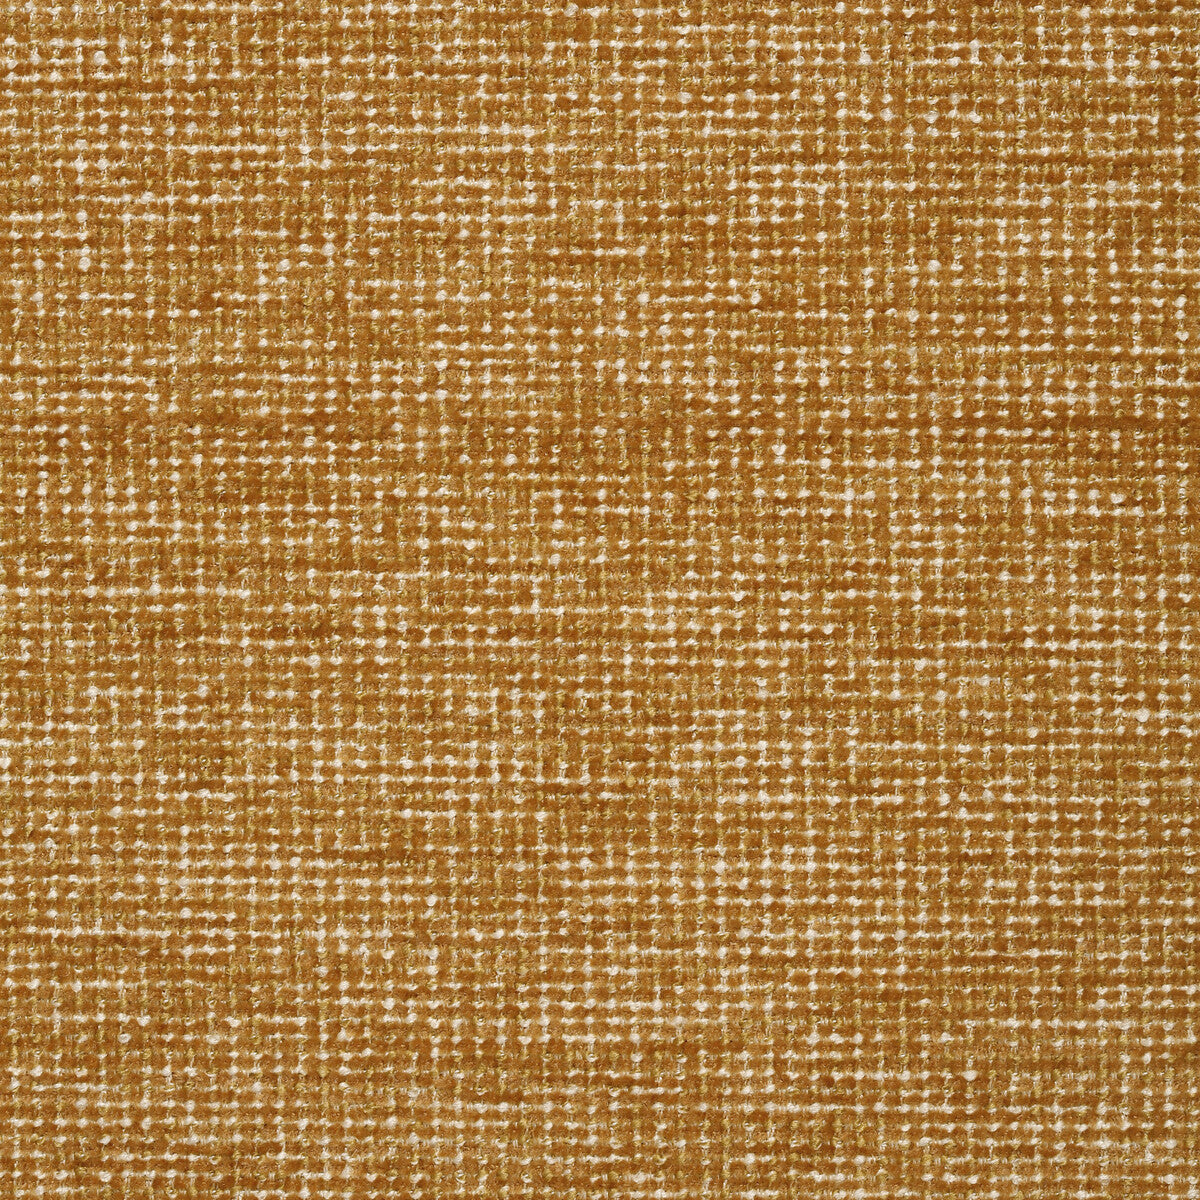 Kravet Smart fabric in 35115-12 color - pattern 35115.12.0 - by Kravet Smart in the Crypton Home collection